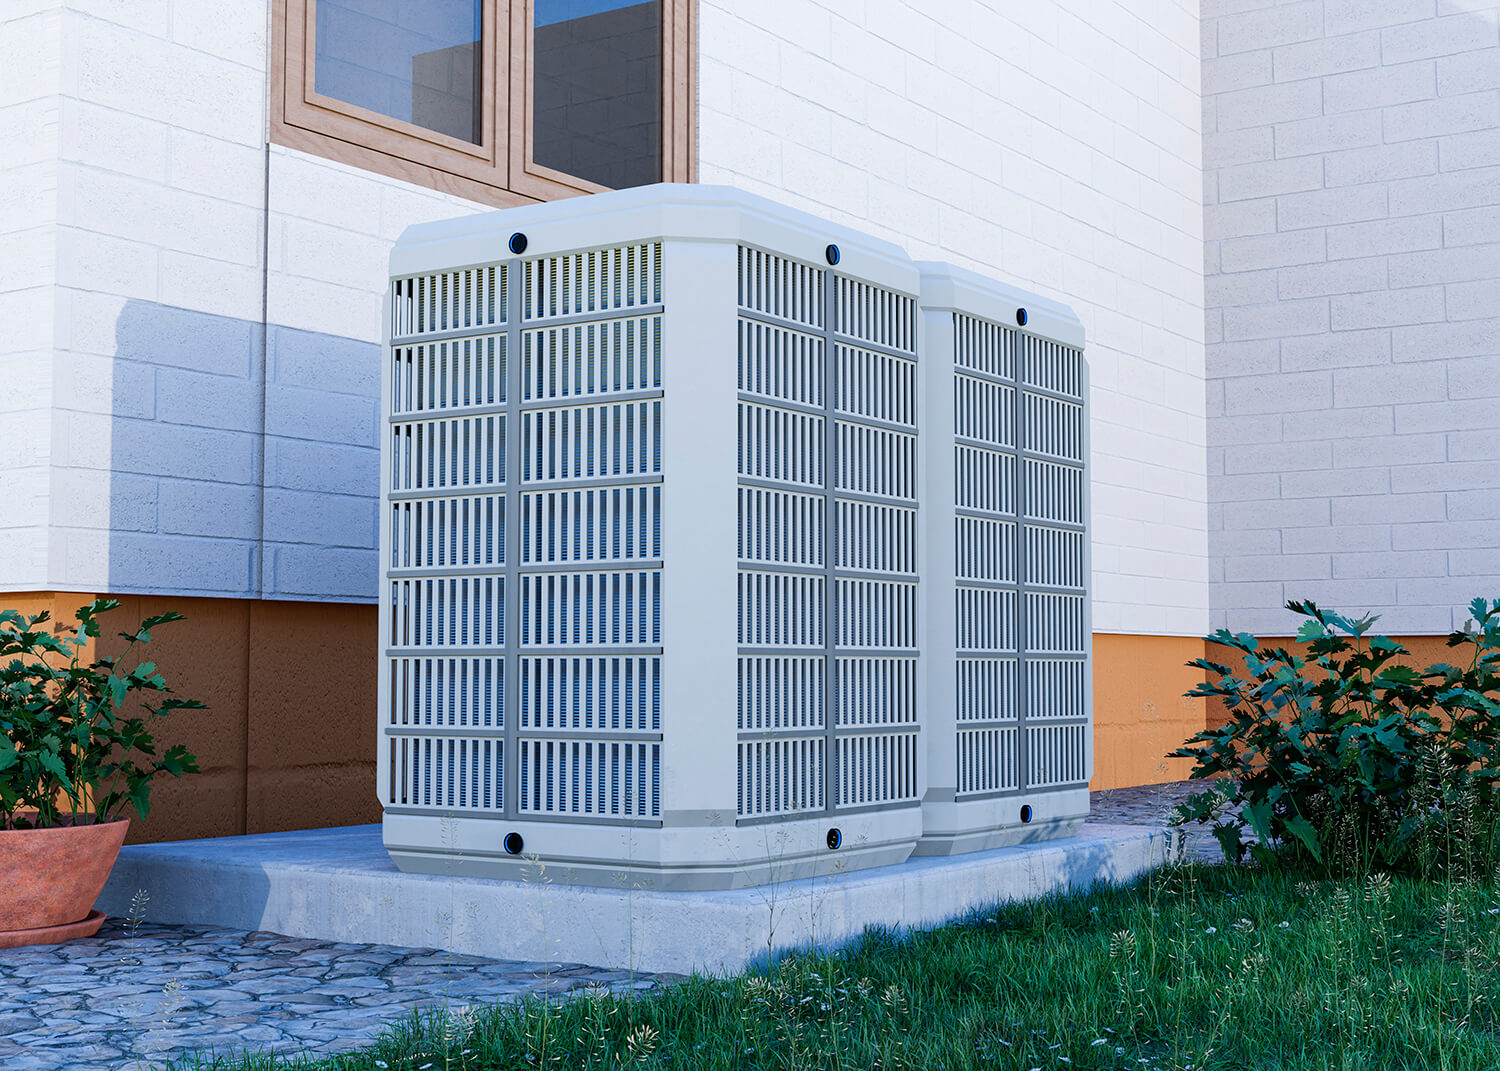 Taking care of your Heating, Ventilation and A/C system is pressing